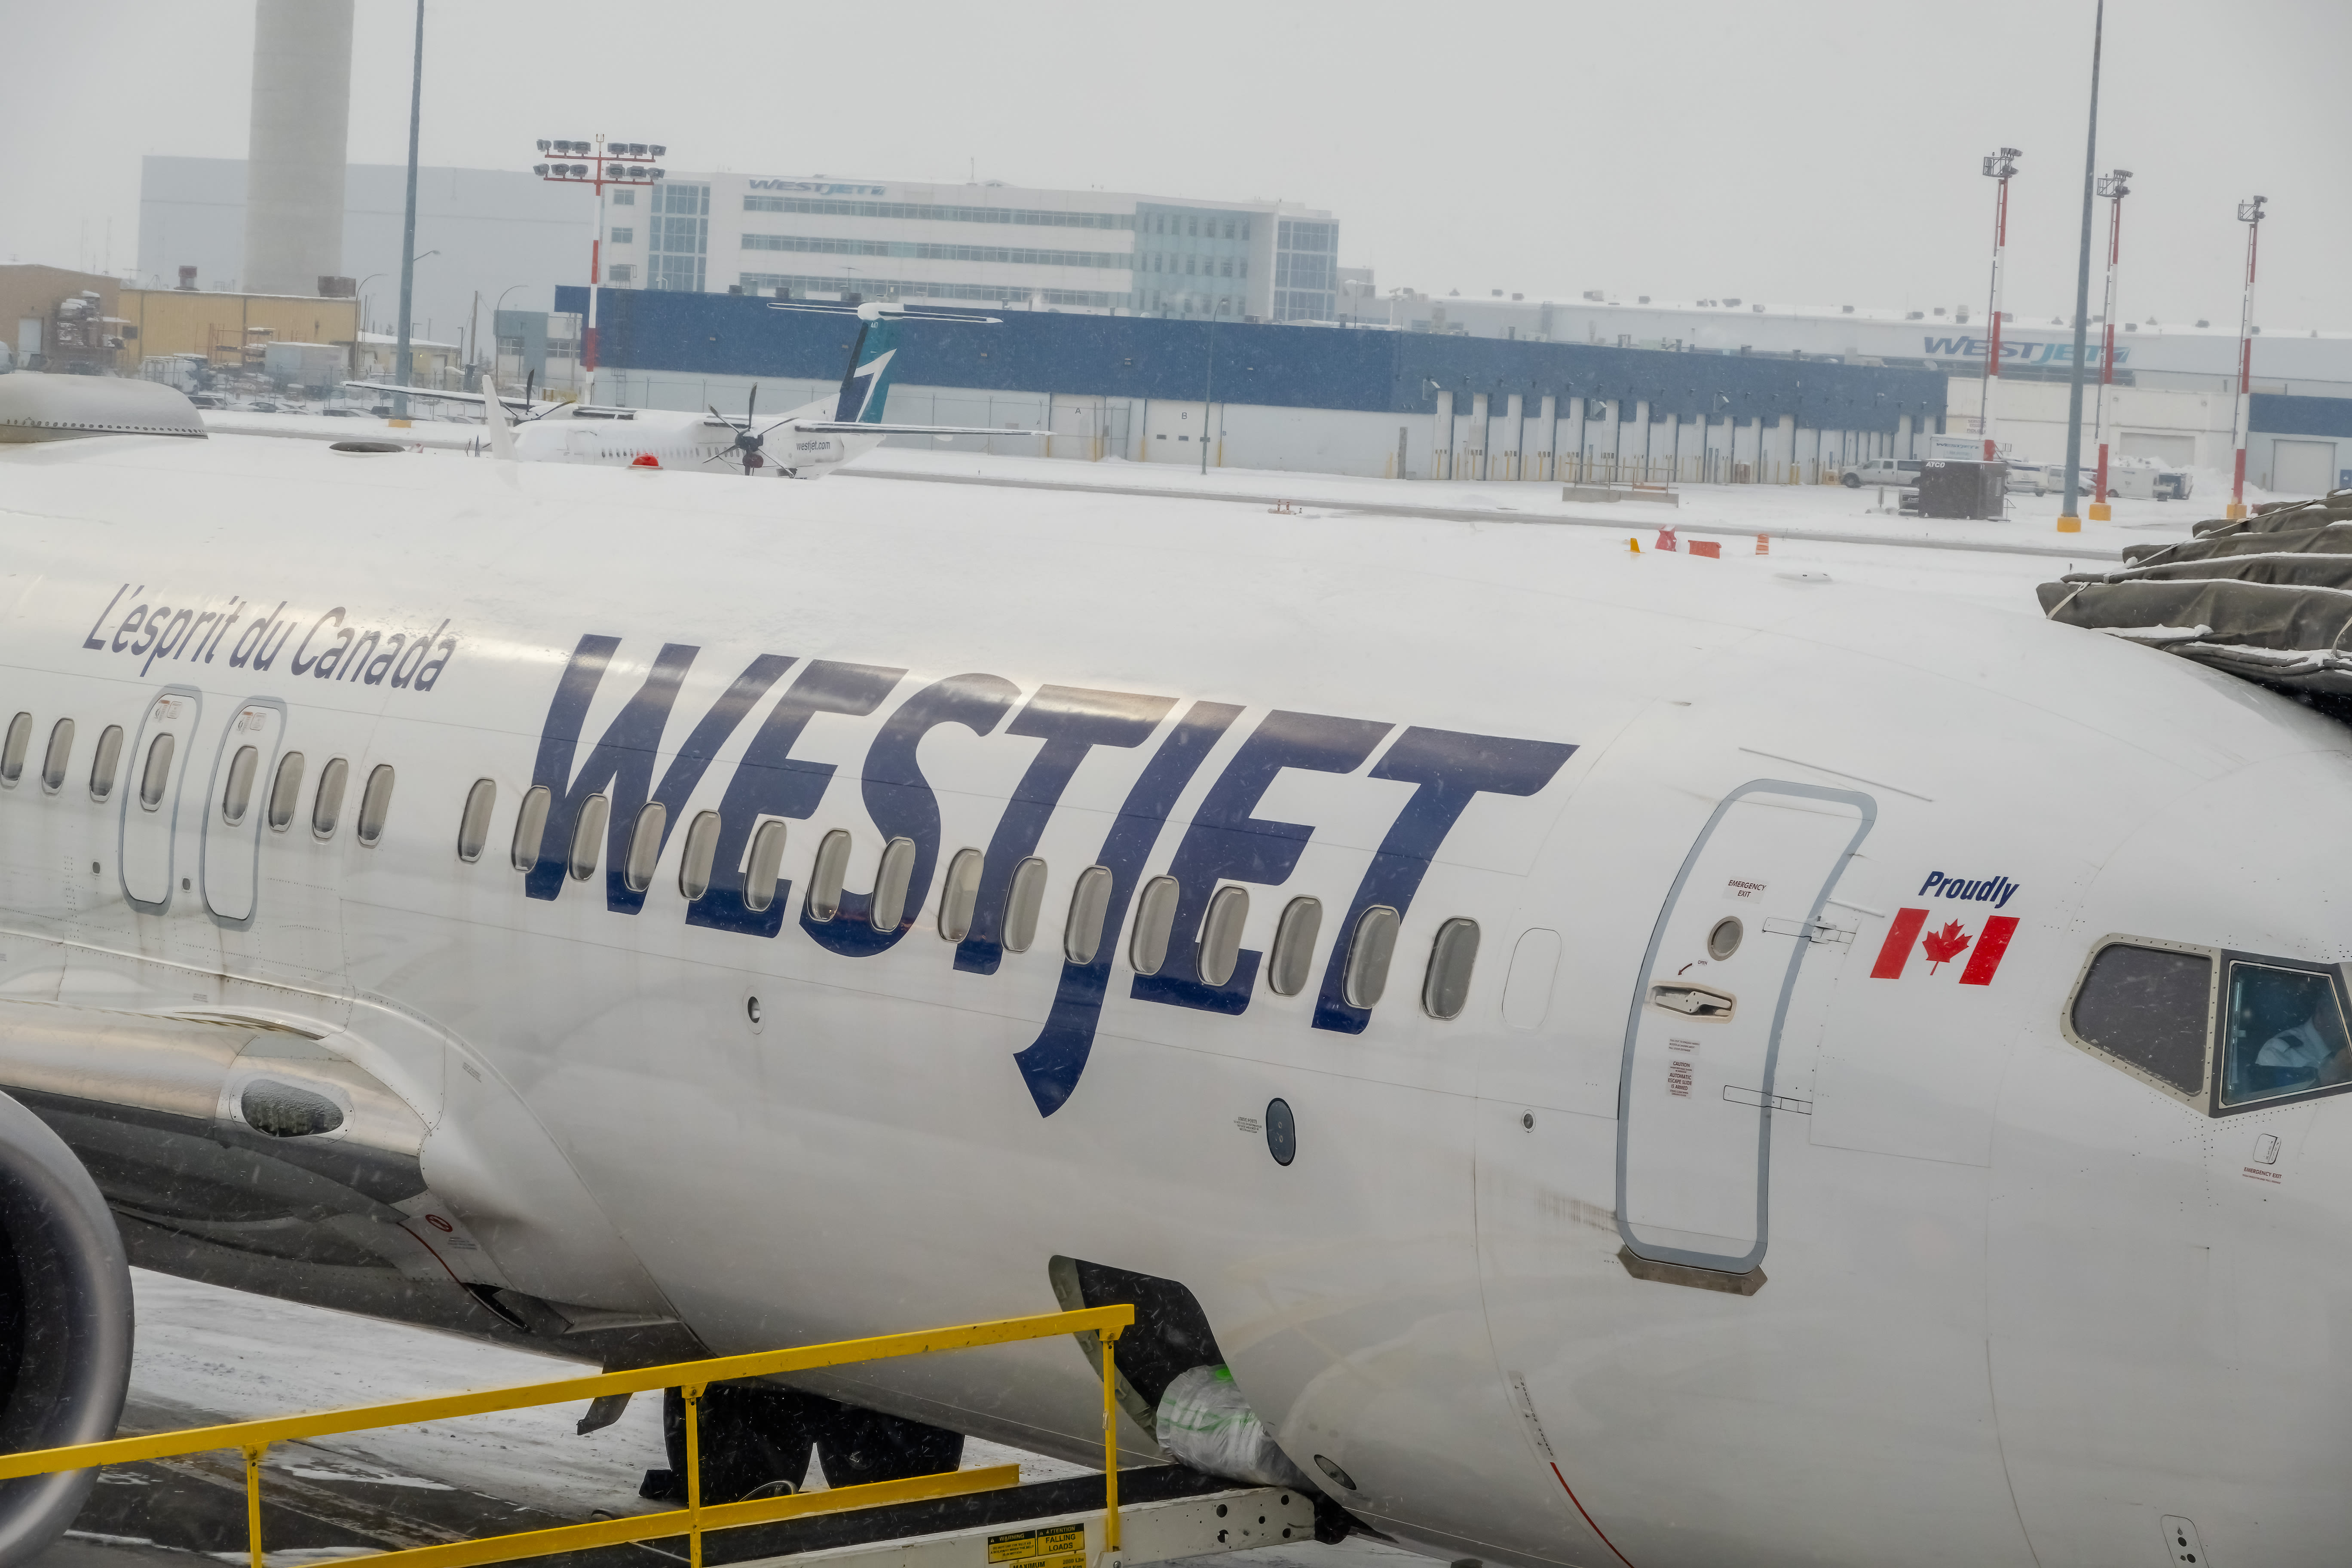 WestJet improves on-time performance in April, leaping to second best in North America